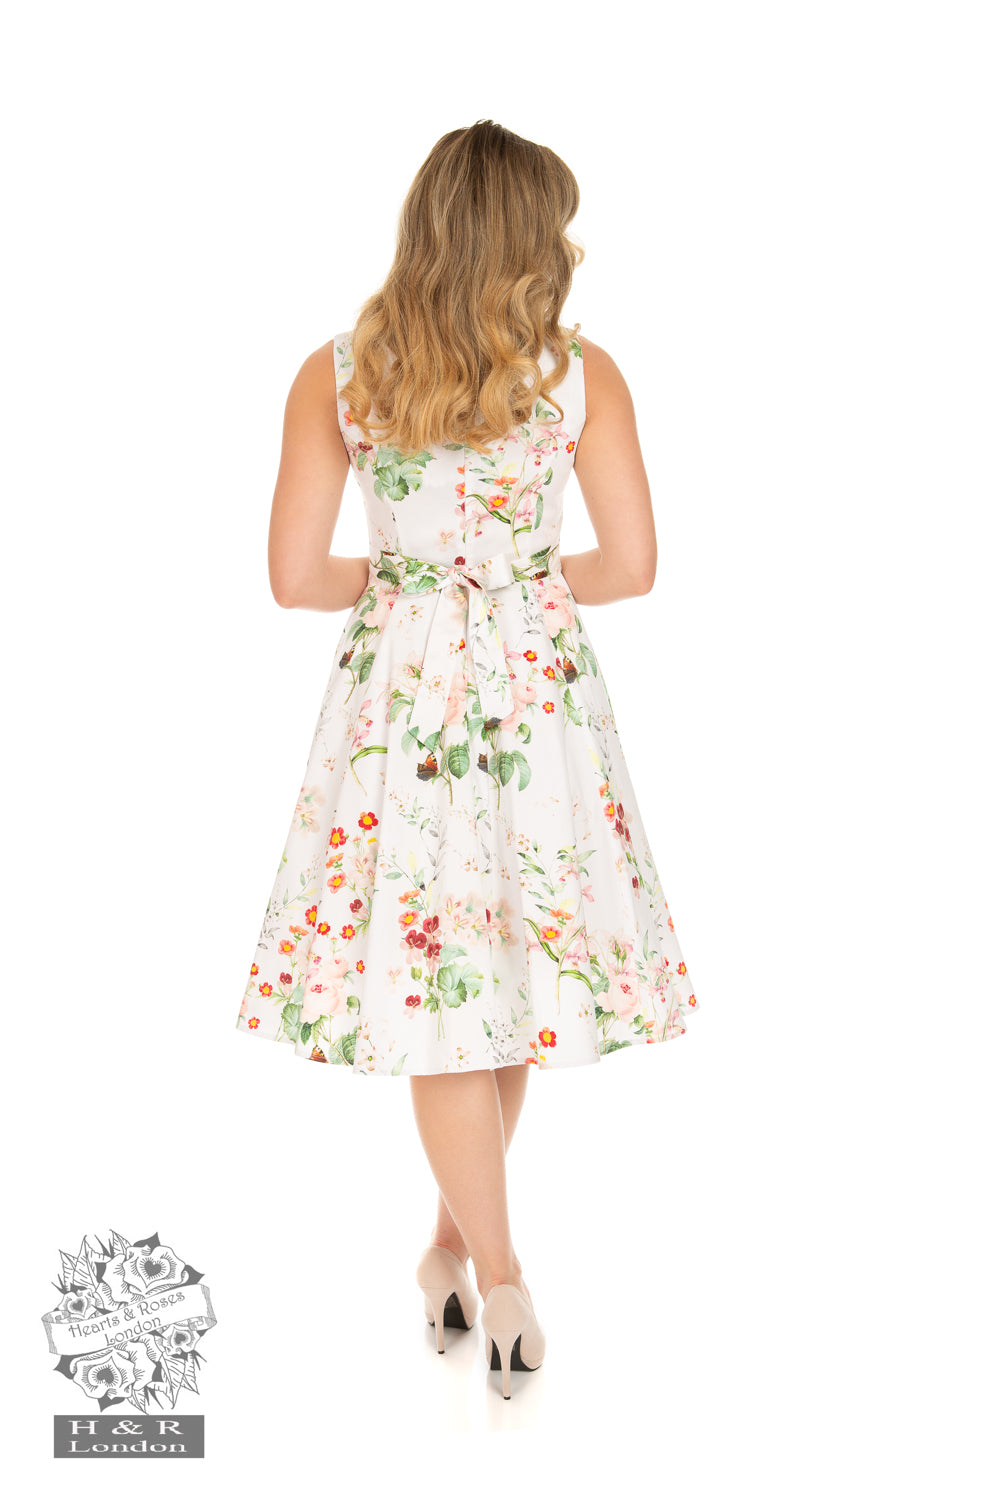 Hearts & Roses 269 Marion Floral Swing Dress - Nichole Jade Rockabilly Boutique